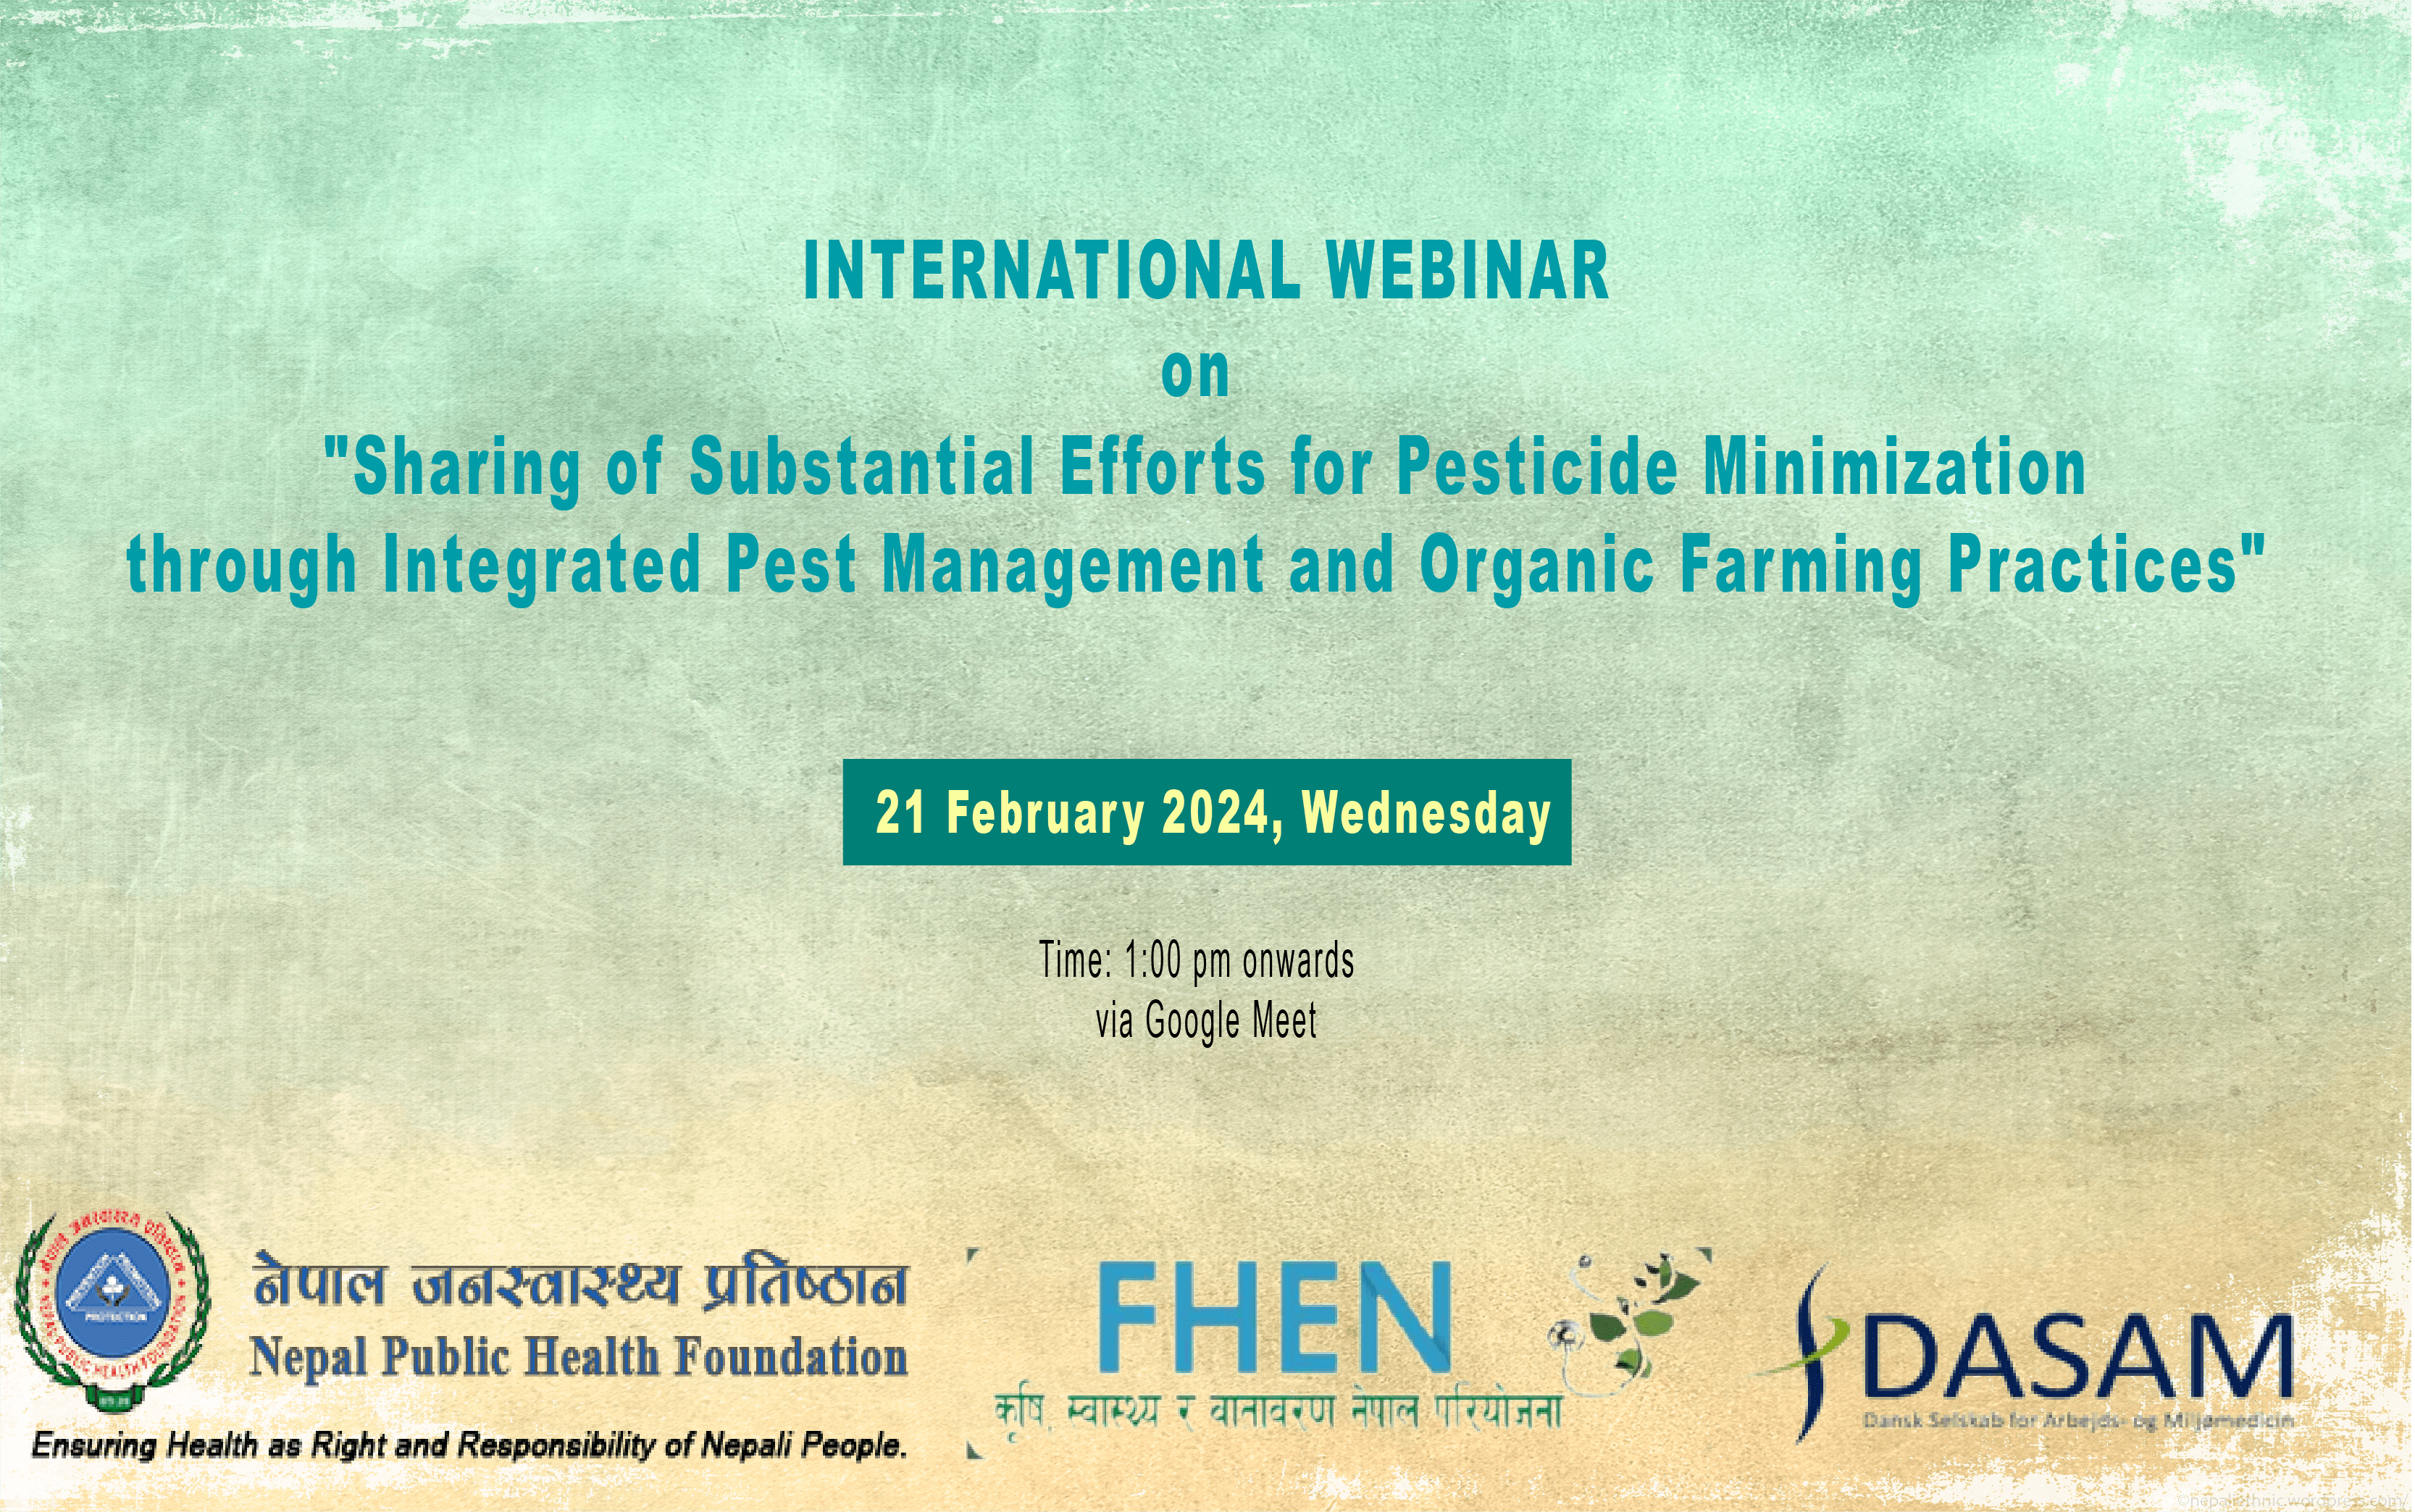 International Webinar on “Sharing of Substantial Efforts for Pesticide Minimization through Integrated Pest Management and Organic Farming Practices”